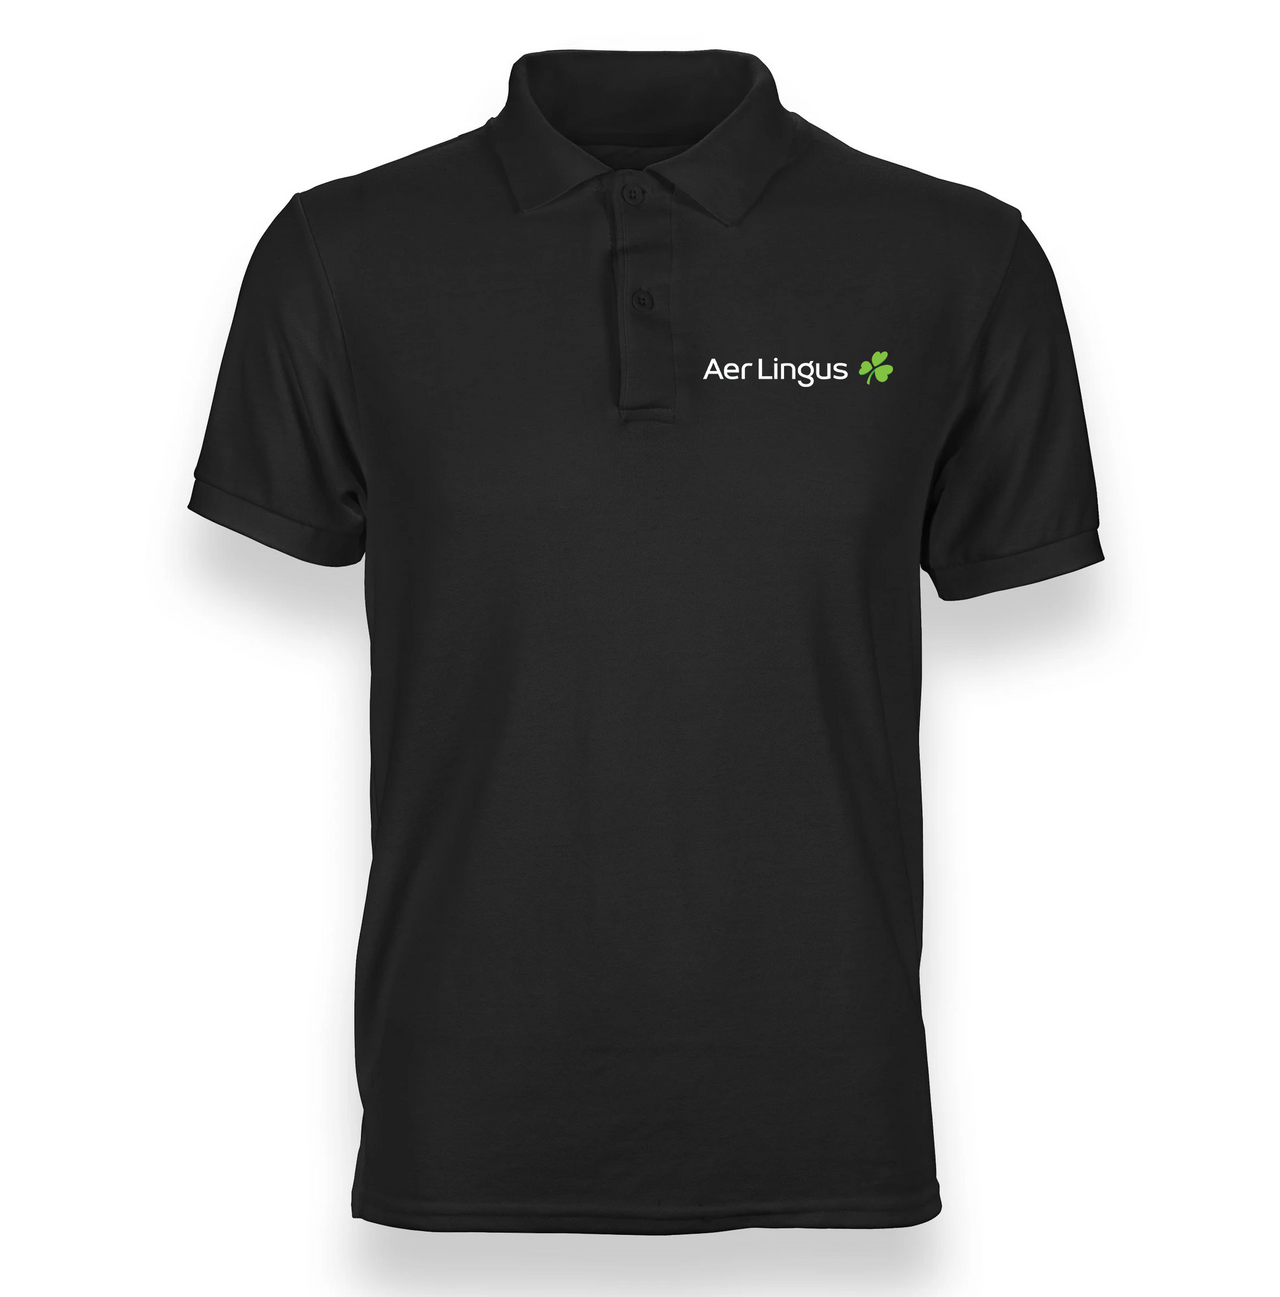 LINGUS AIRLINES POLO T-SHIRT